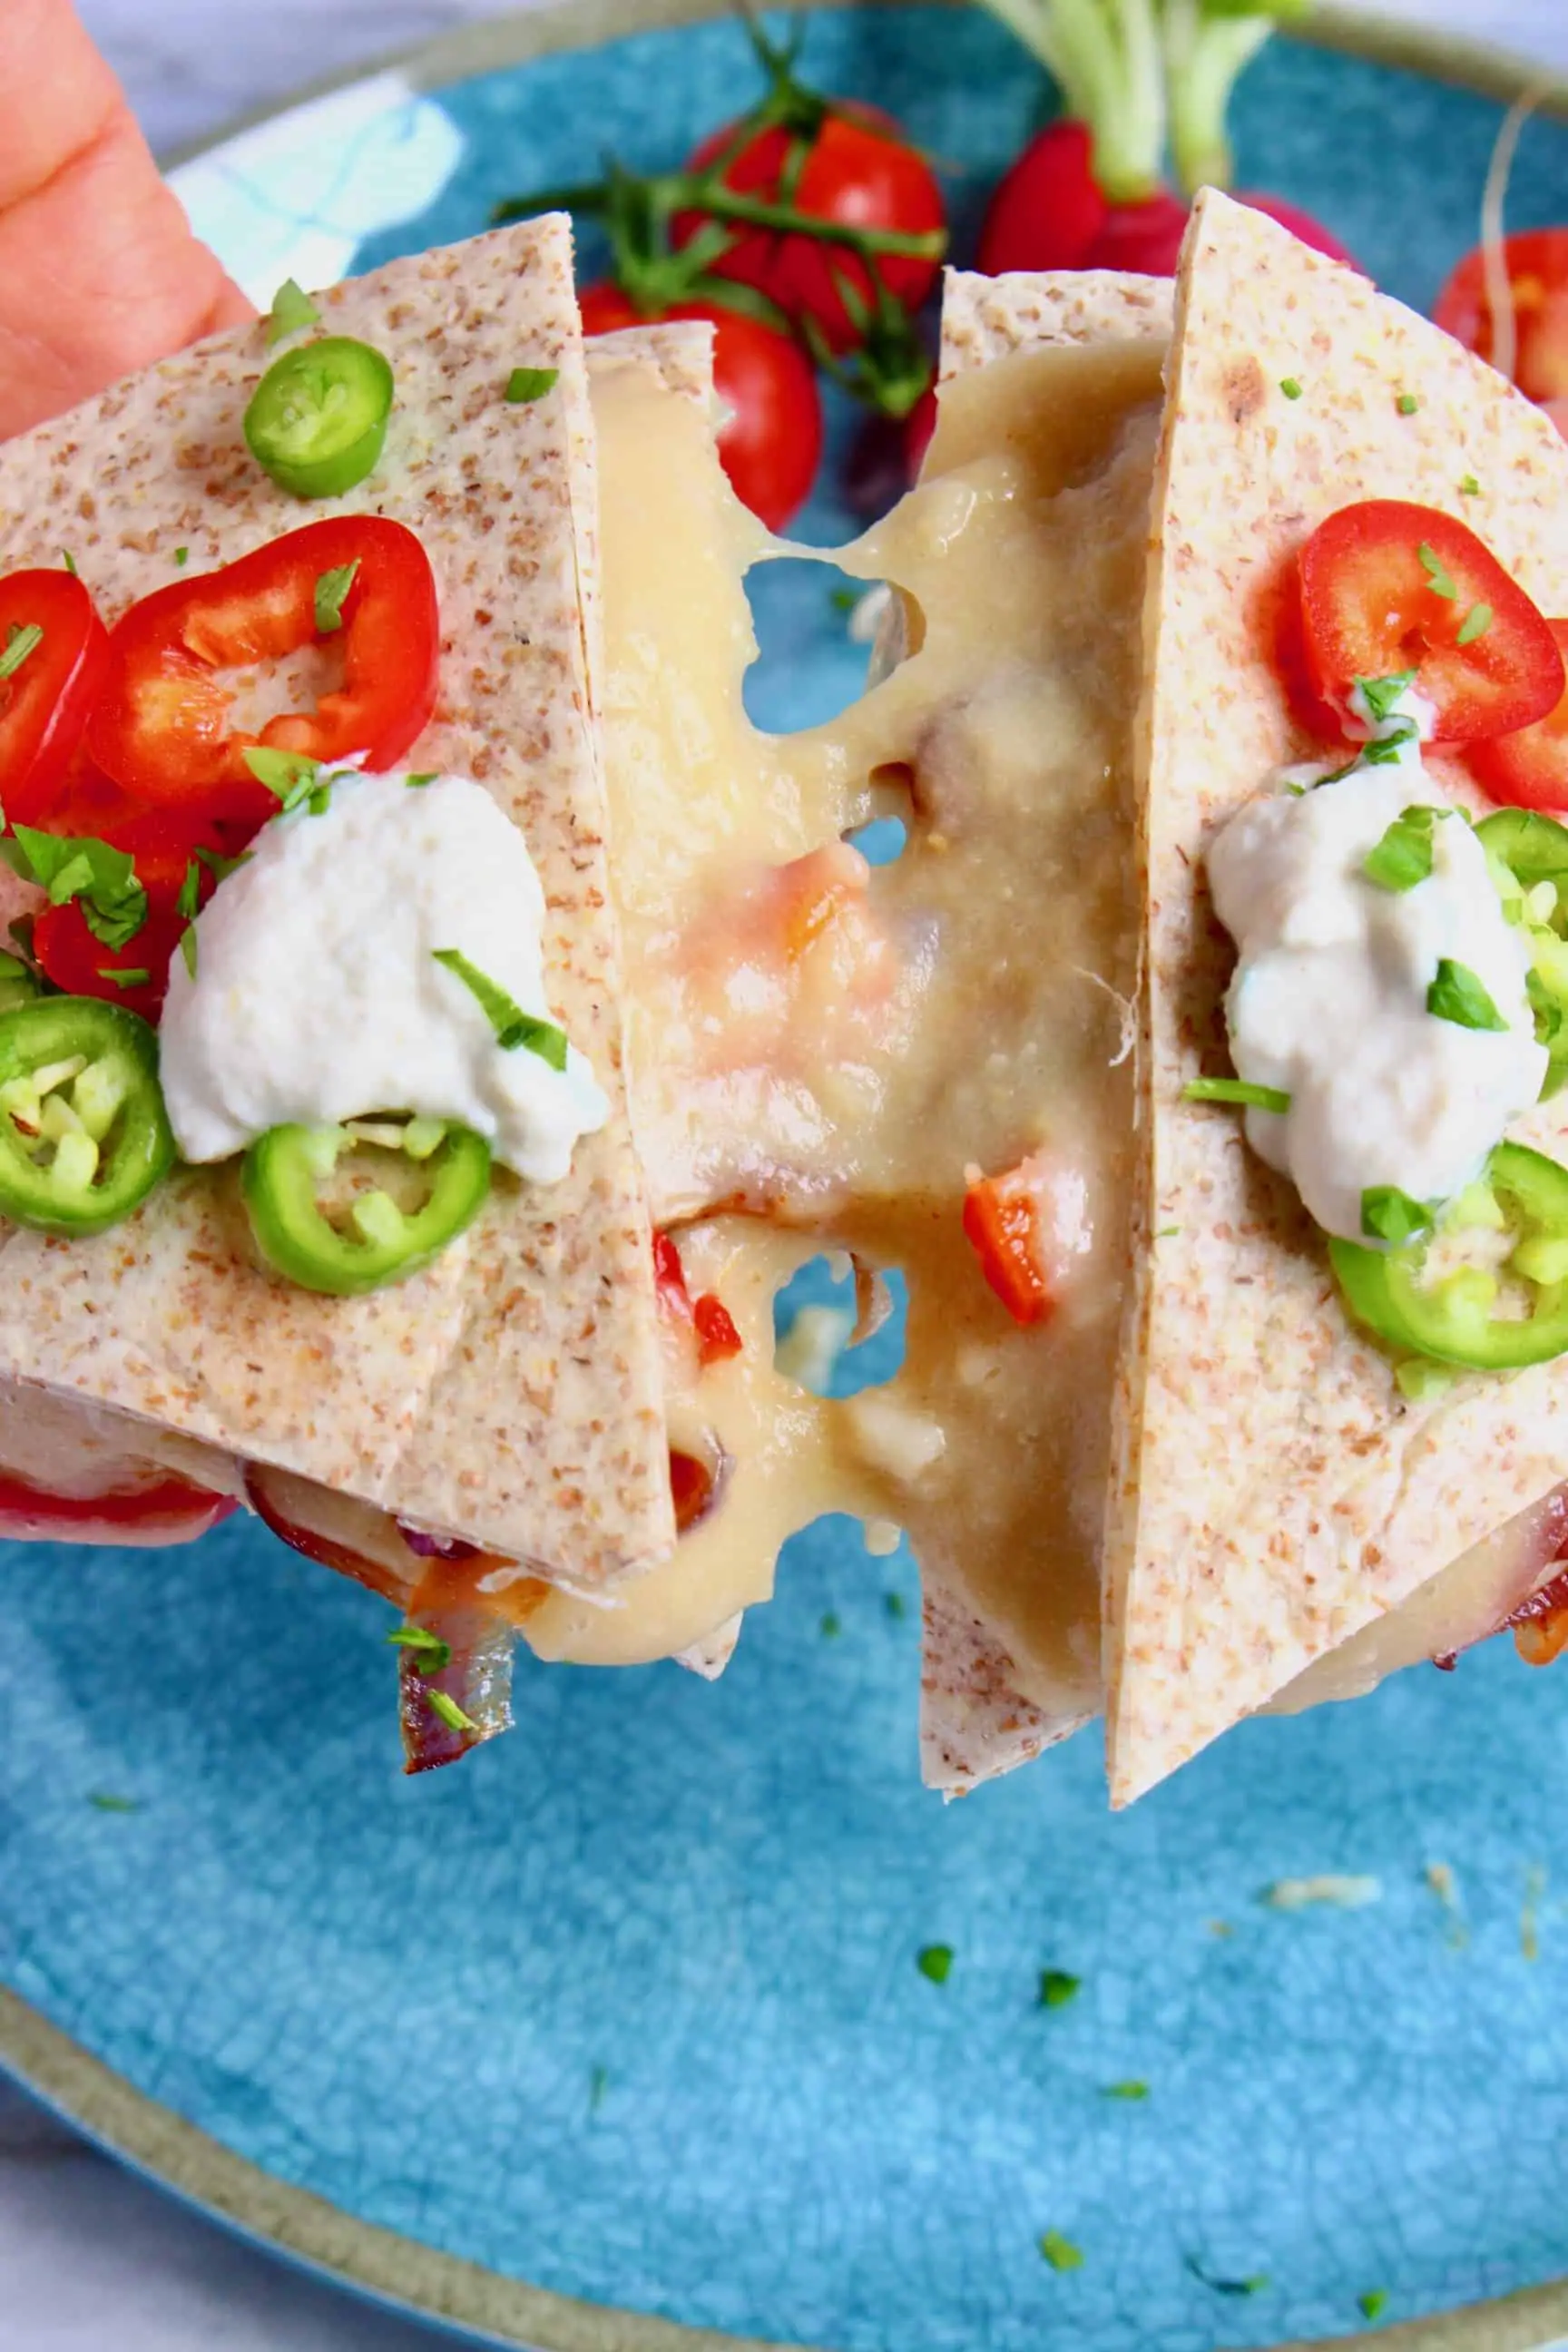 A quesadilla with cheese and vegetables being held up against a blue plate